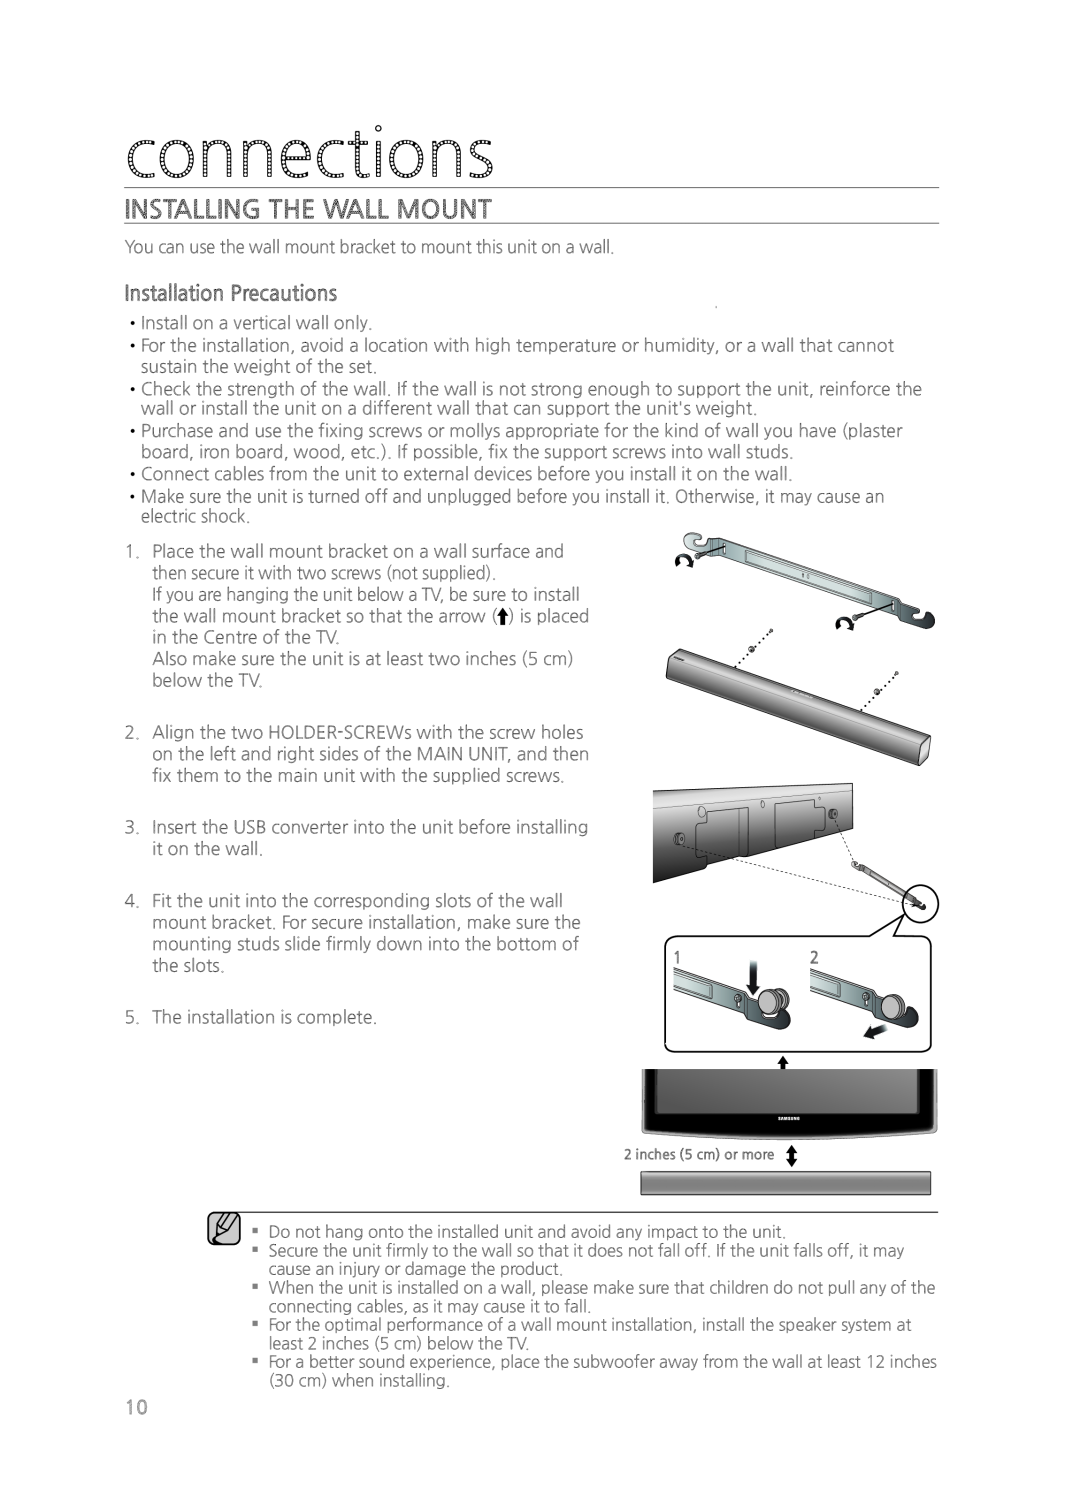 Samsung HW-H550/ZA, HWH550, HWH551, HW-H551/ZA user manual connections, Installing The Wall Mount, Installation Precautions 